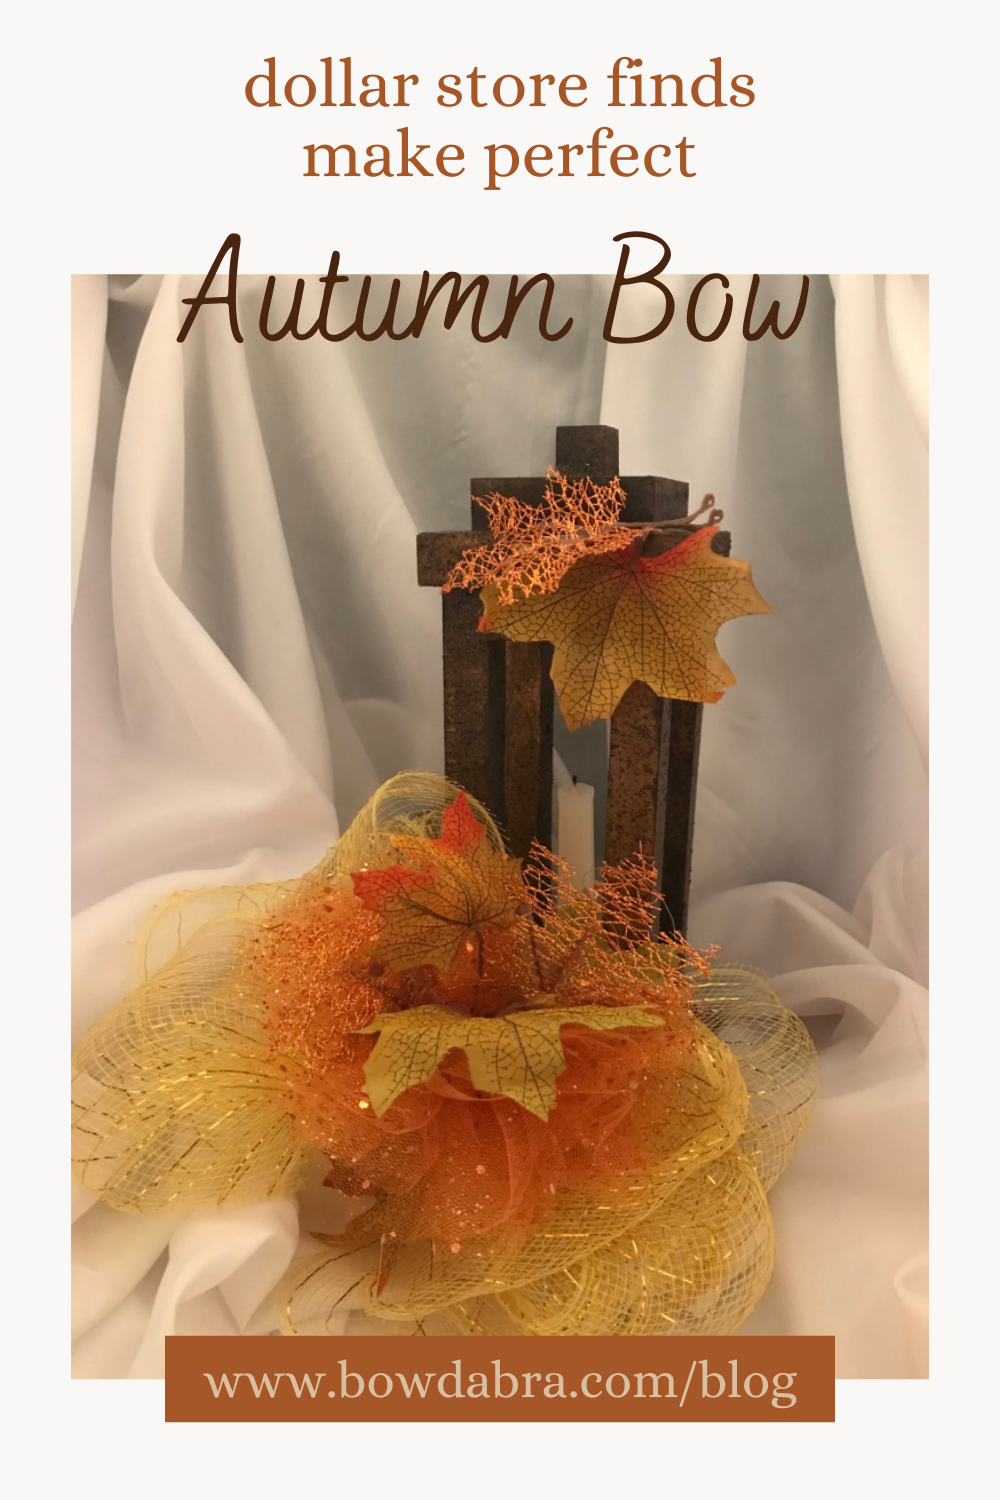 Autumn Bow from Dollar Store Finds